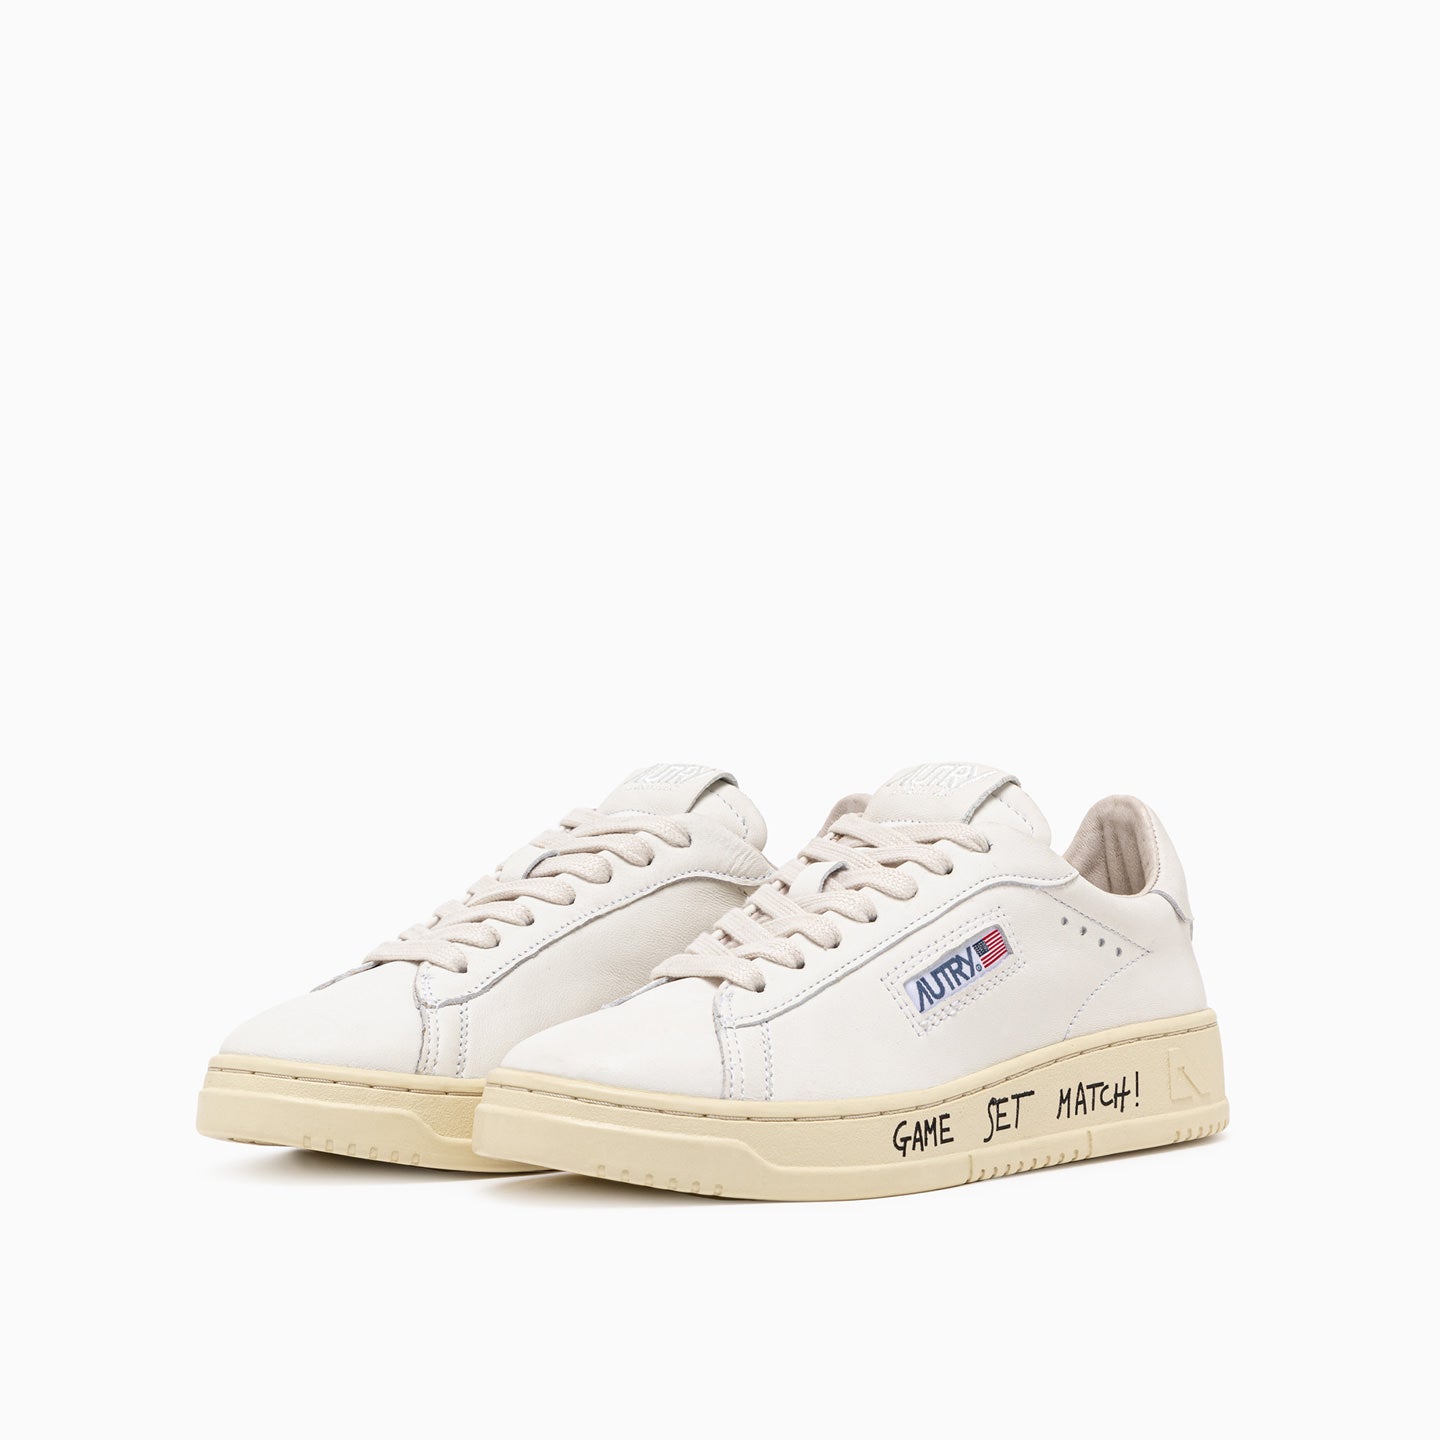 Dallas Low Sneakers in Leather color White and Lettering